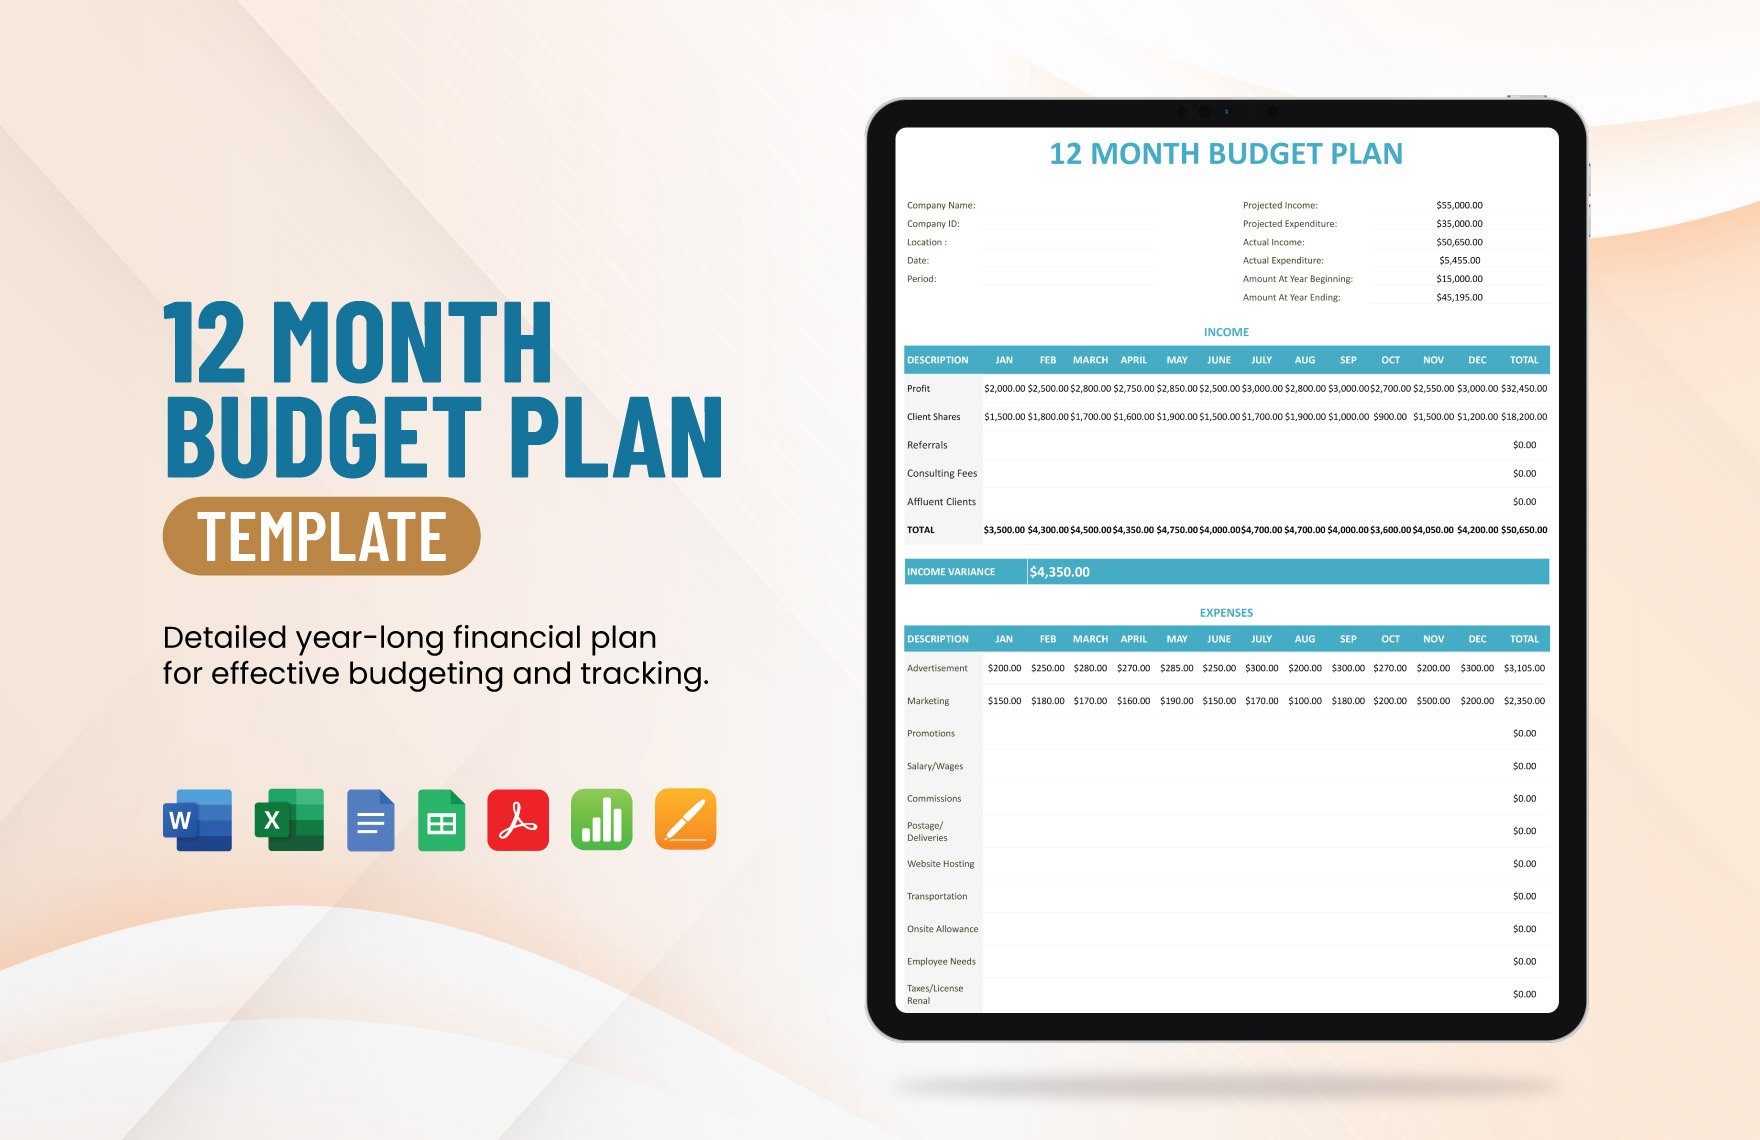 12 Month Budget Plan Template in Word, Google Docs, Excel, PDF, Google Sheets, Apple Pages, Apple Numbers